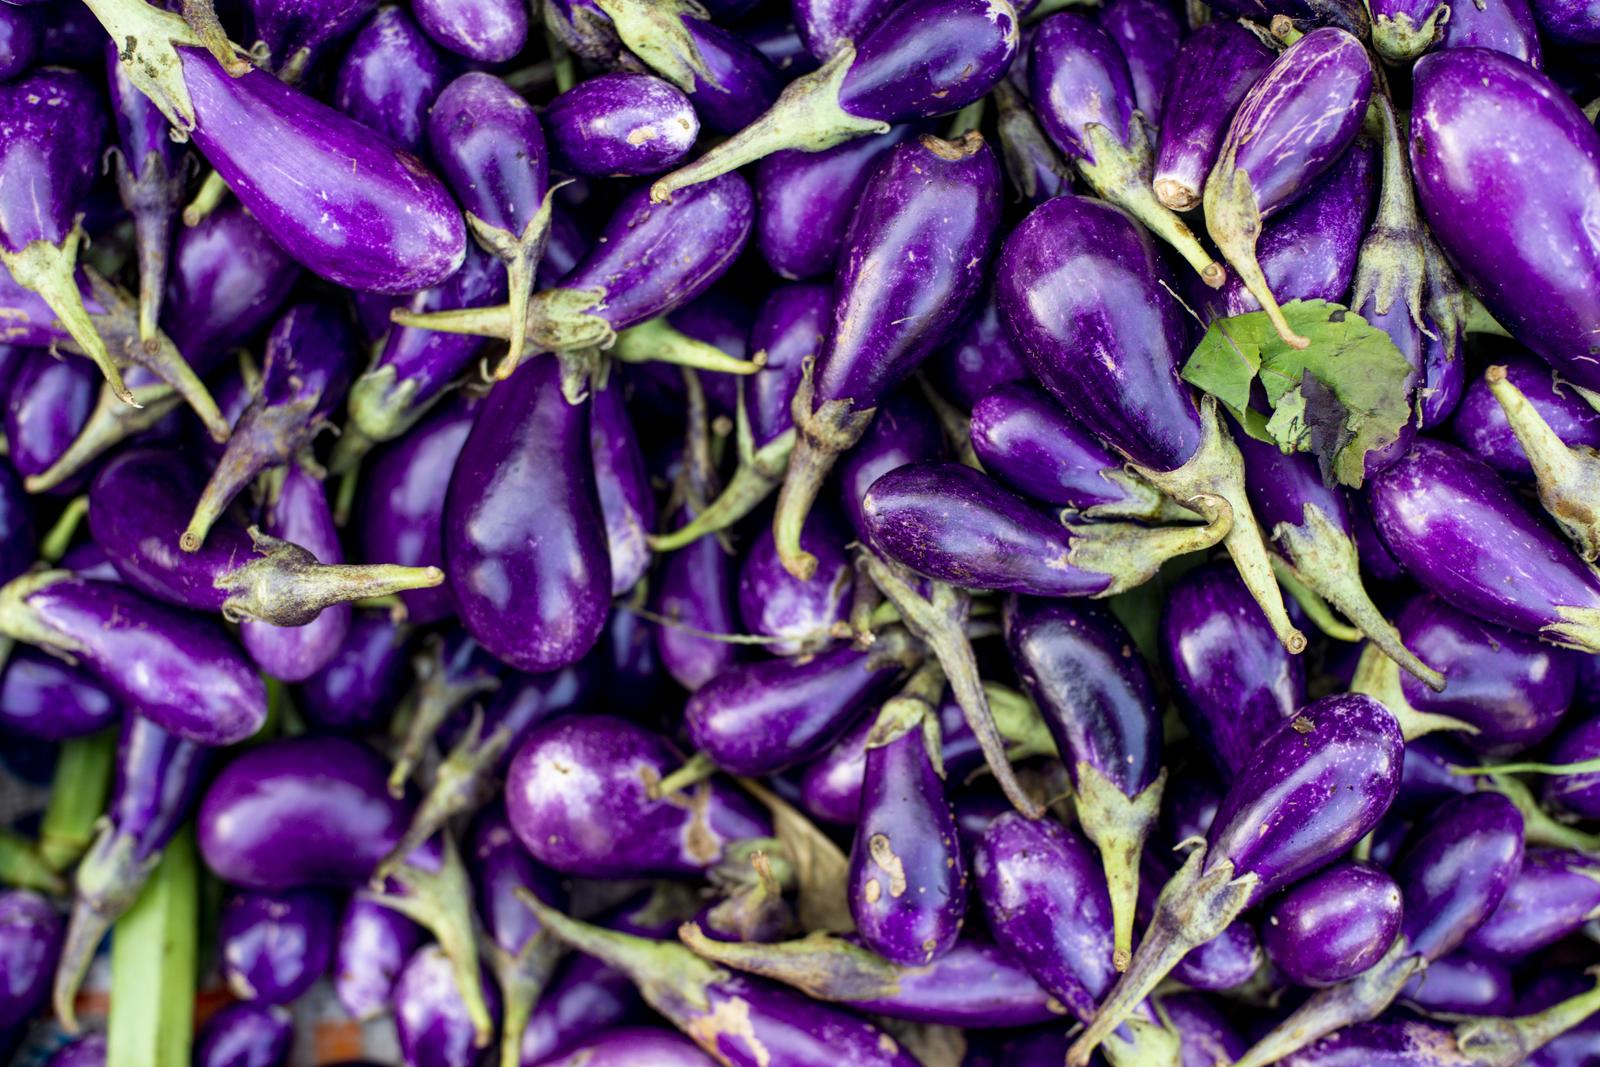 We’ll Guess What 🍁 Season You Were Born In, But You Have to Pick a Food in Every 🌈 Color First eggplant